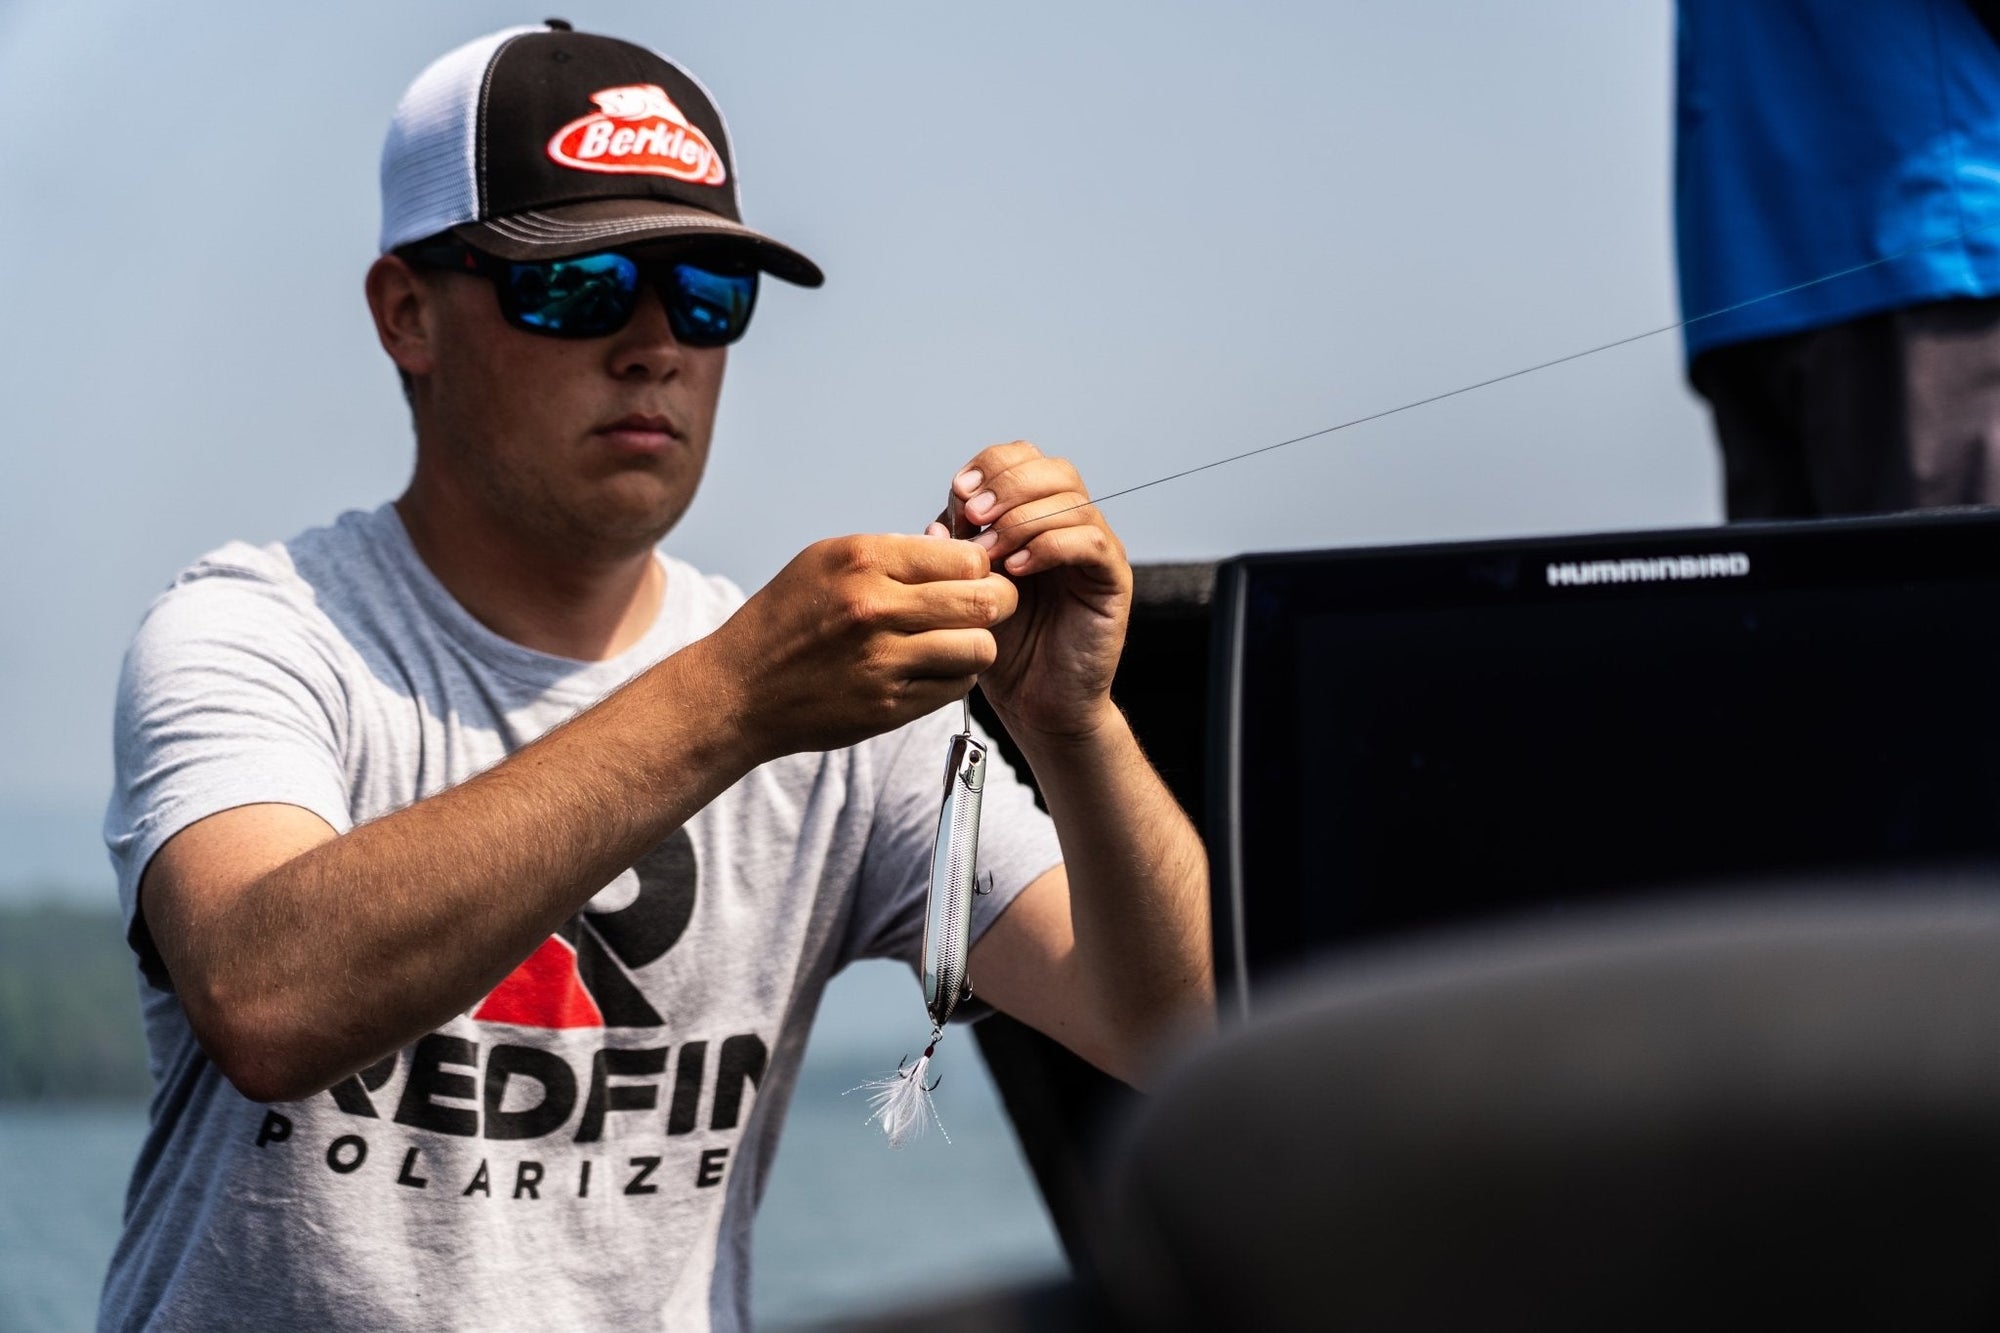 https://redfinpolarized.com/cdn/shop/products/outer-banks-629541_2000x.jpg?v=1710182035